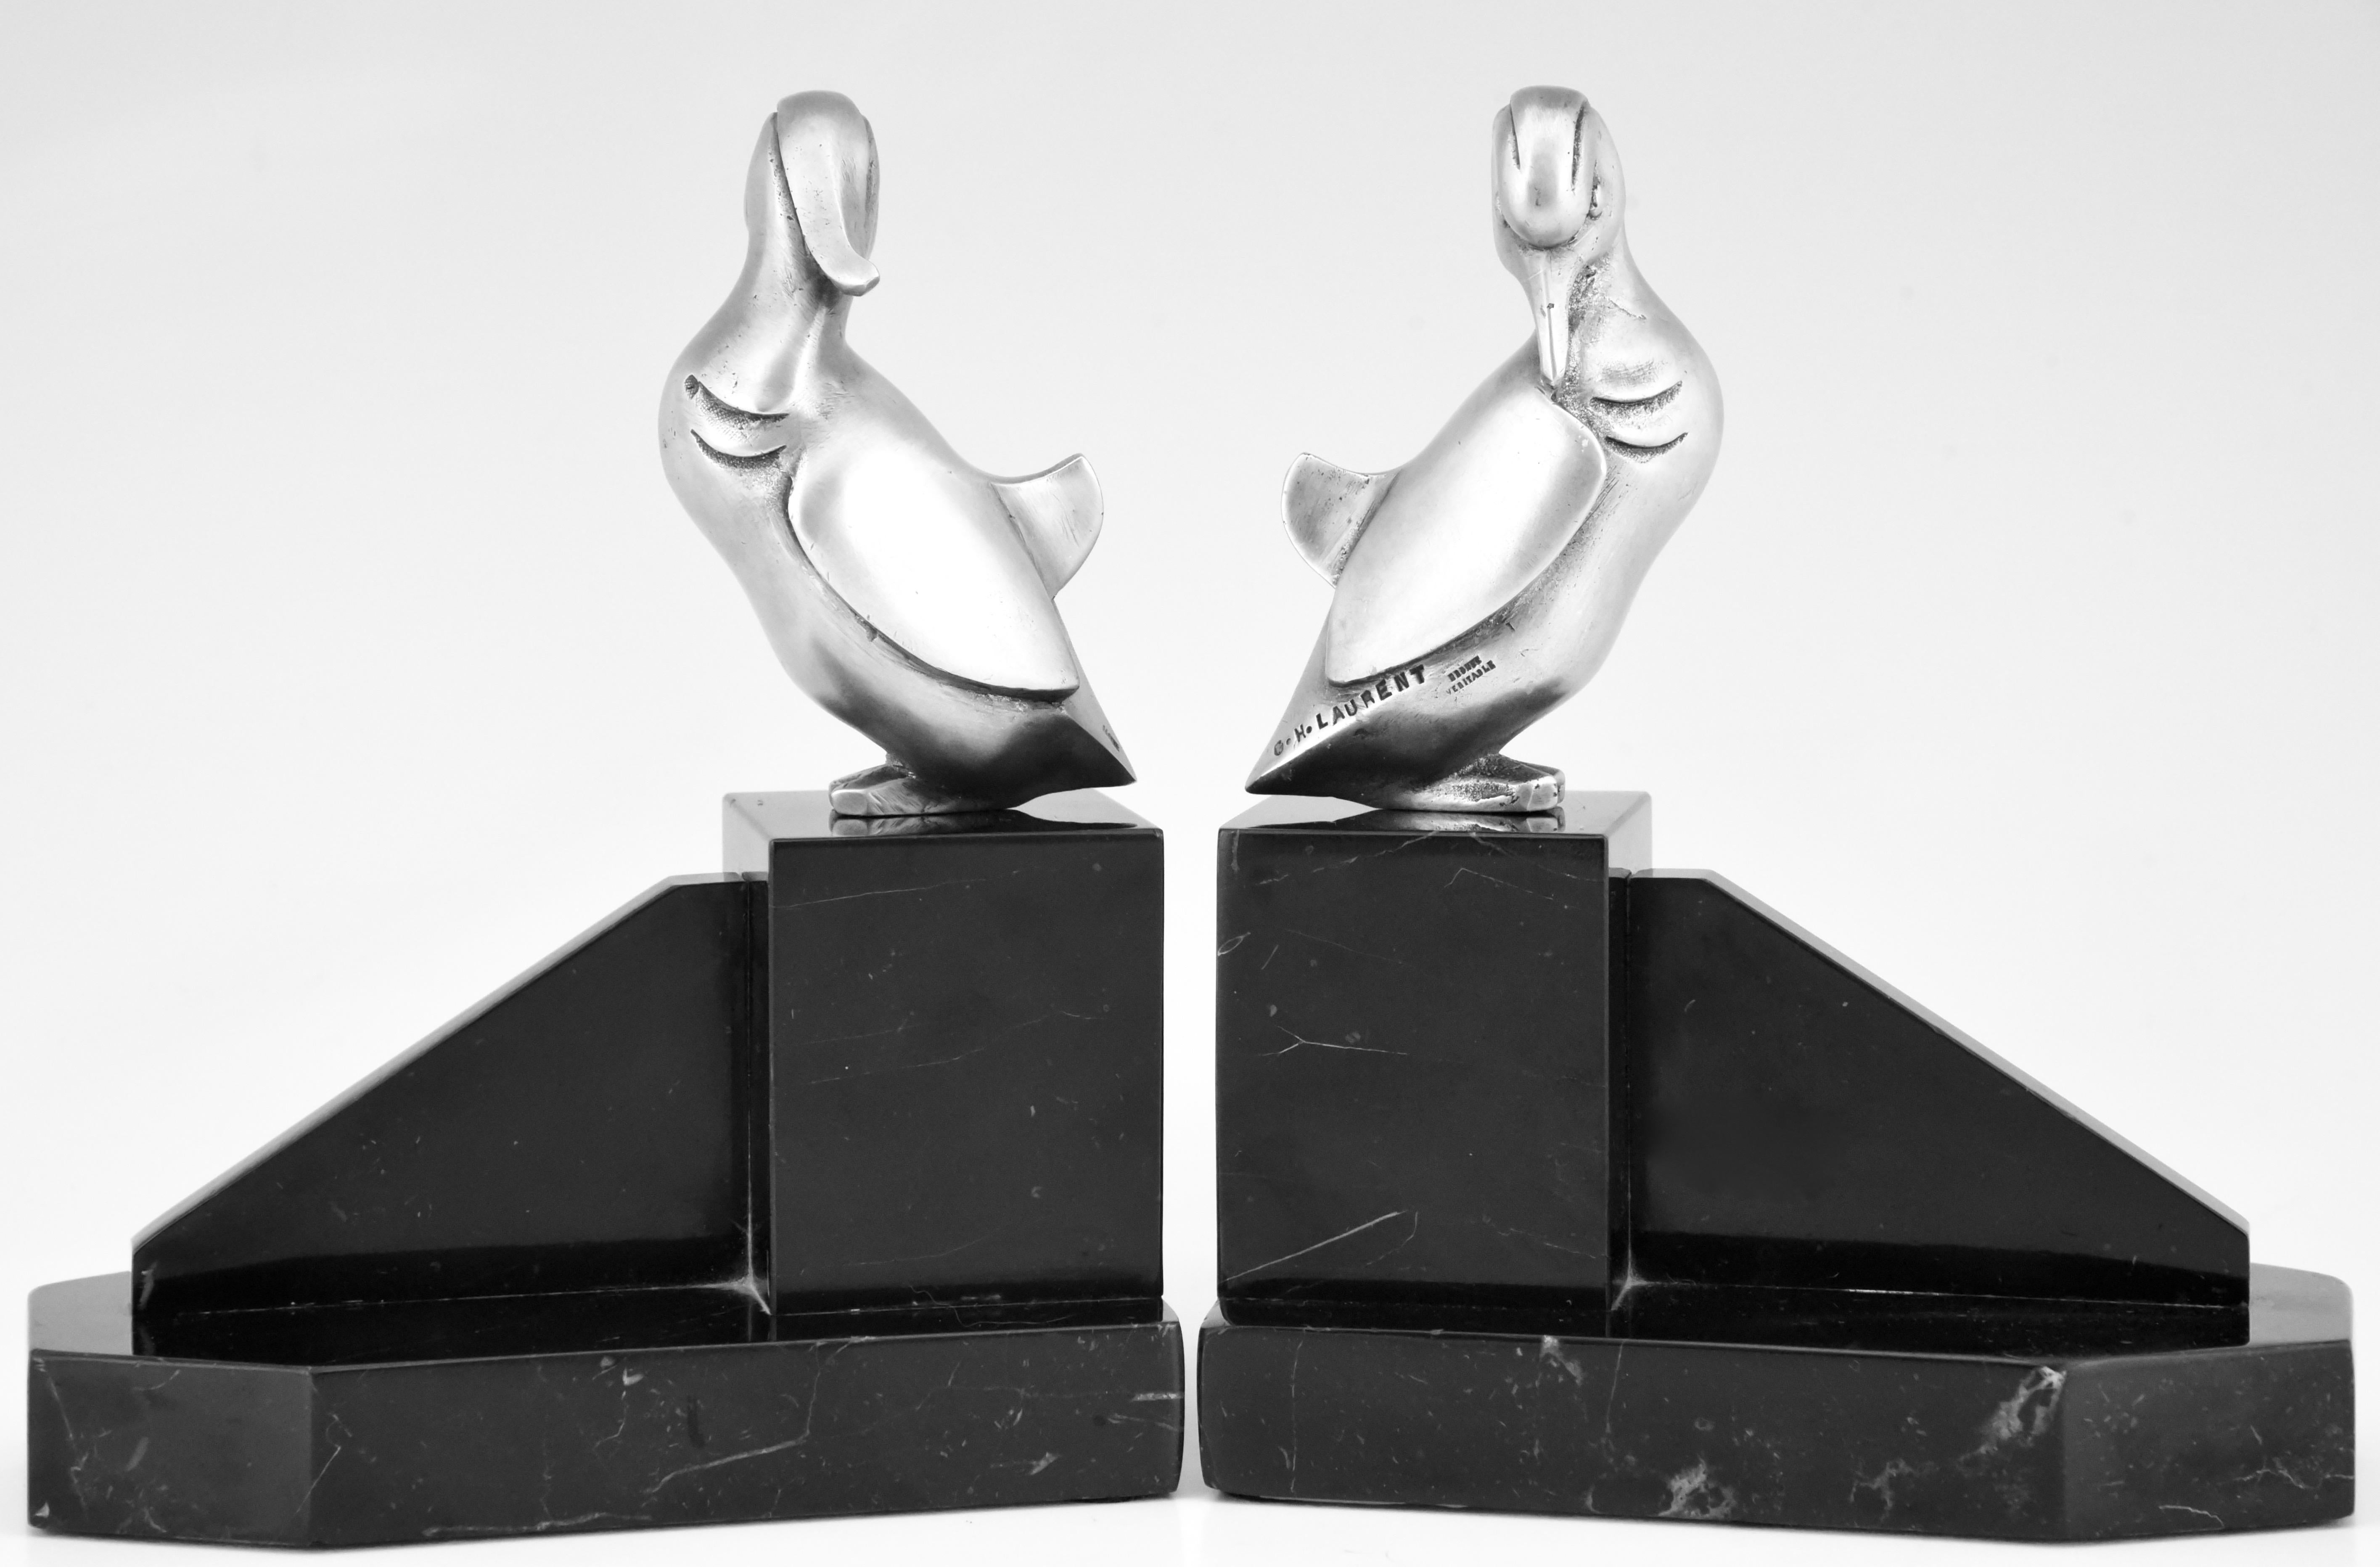 A lovely pair of Art Deco silvered bronze duck bookends on black marble bases. Signed by the French artist Georges H Laurent, circa 1925

Similar pairs are illustrated in the book:
“Art Deco and other figures” by Brian Catley. ??
General